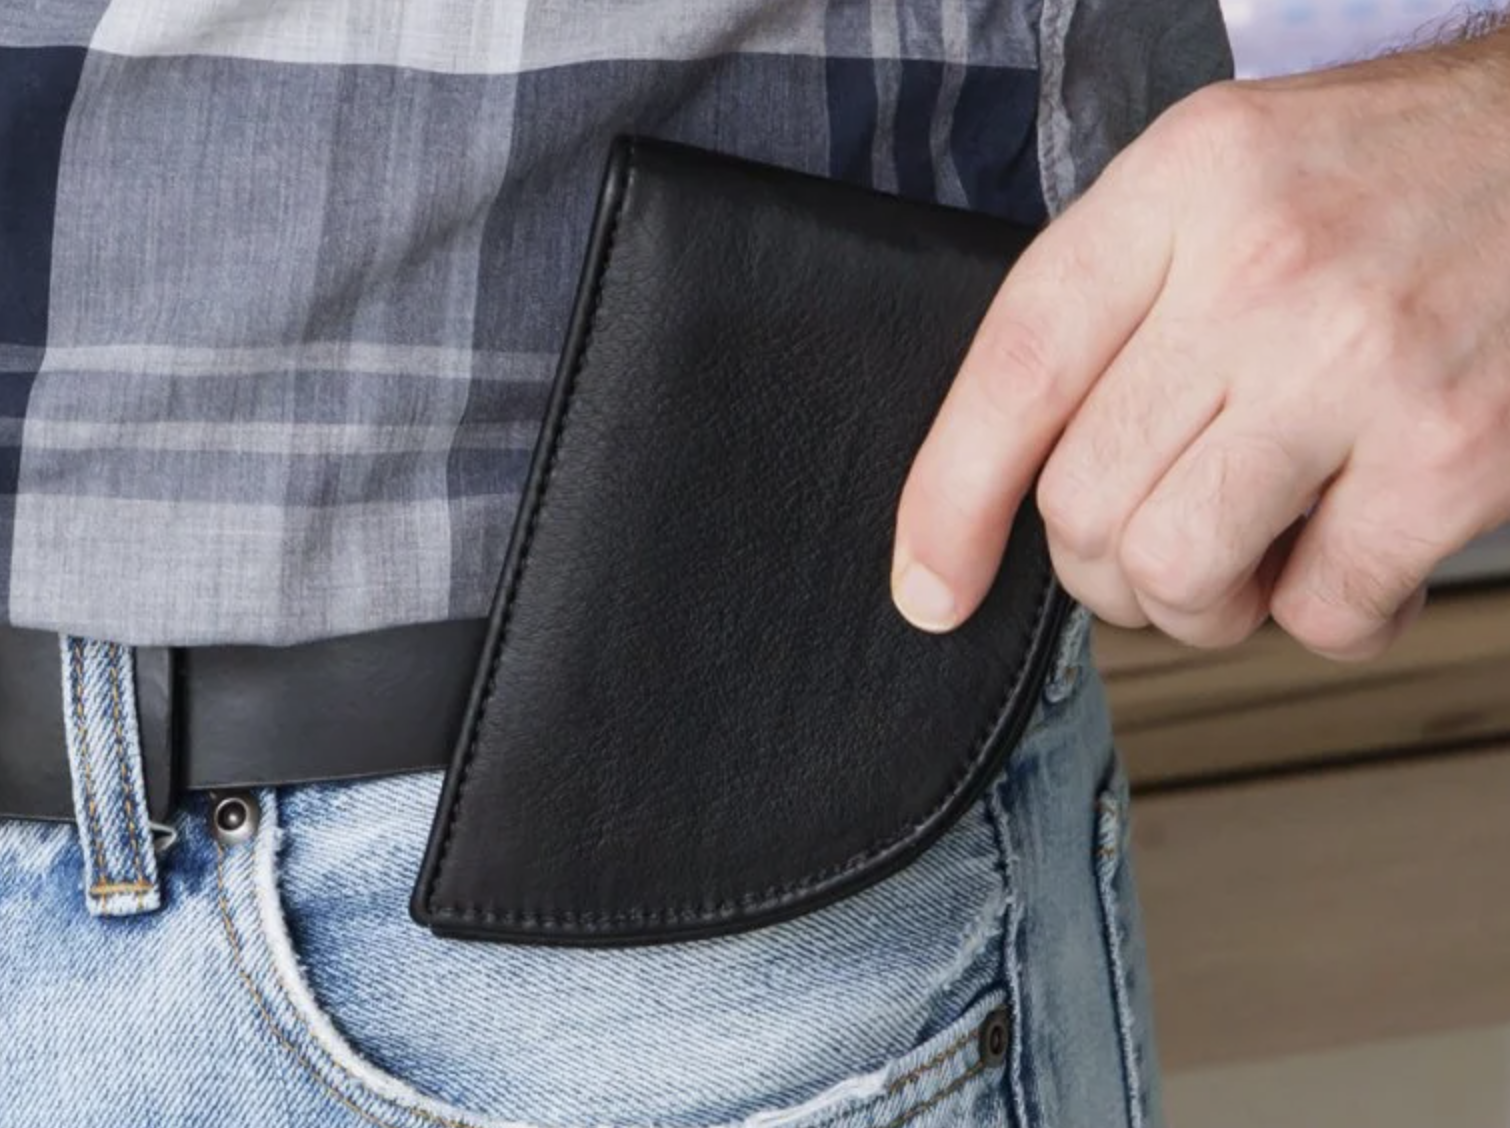 The curved wallet being put in a pocket 